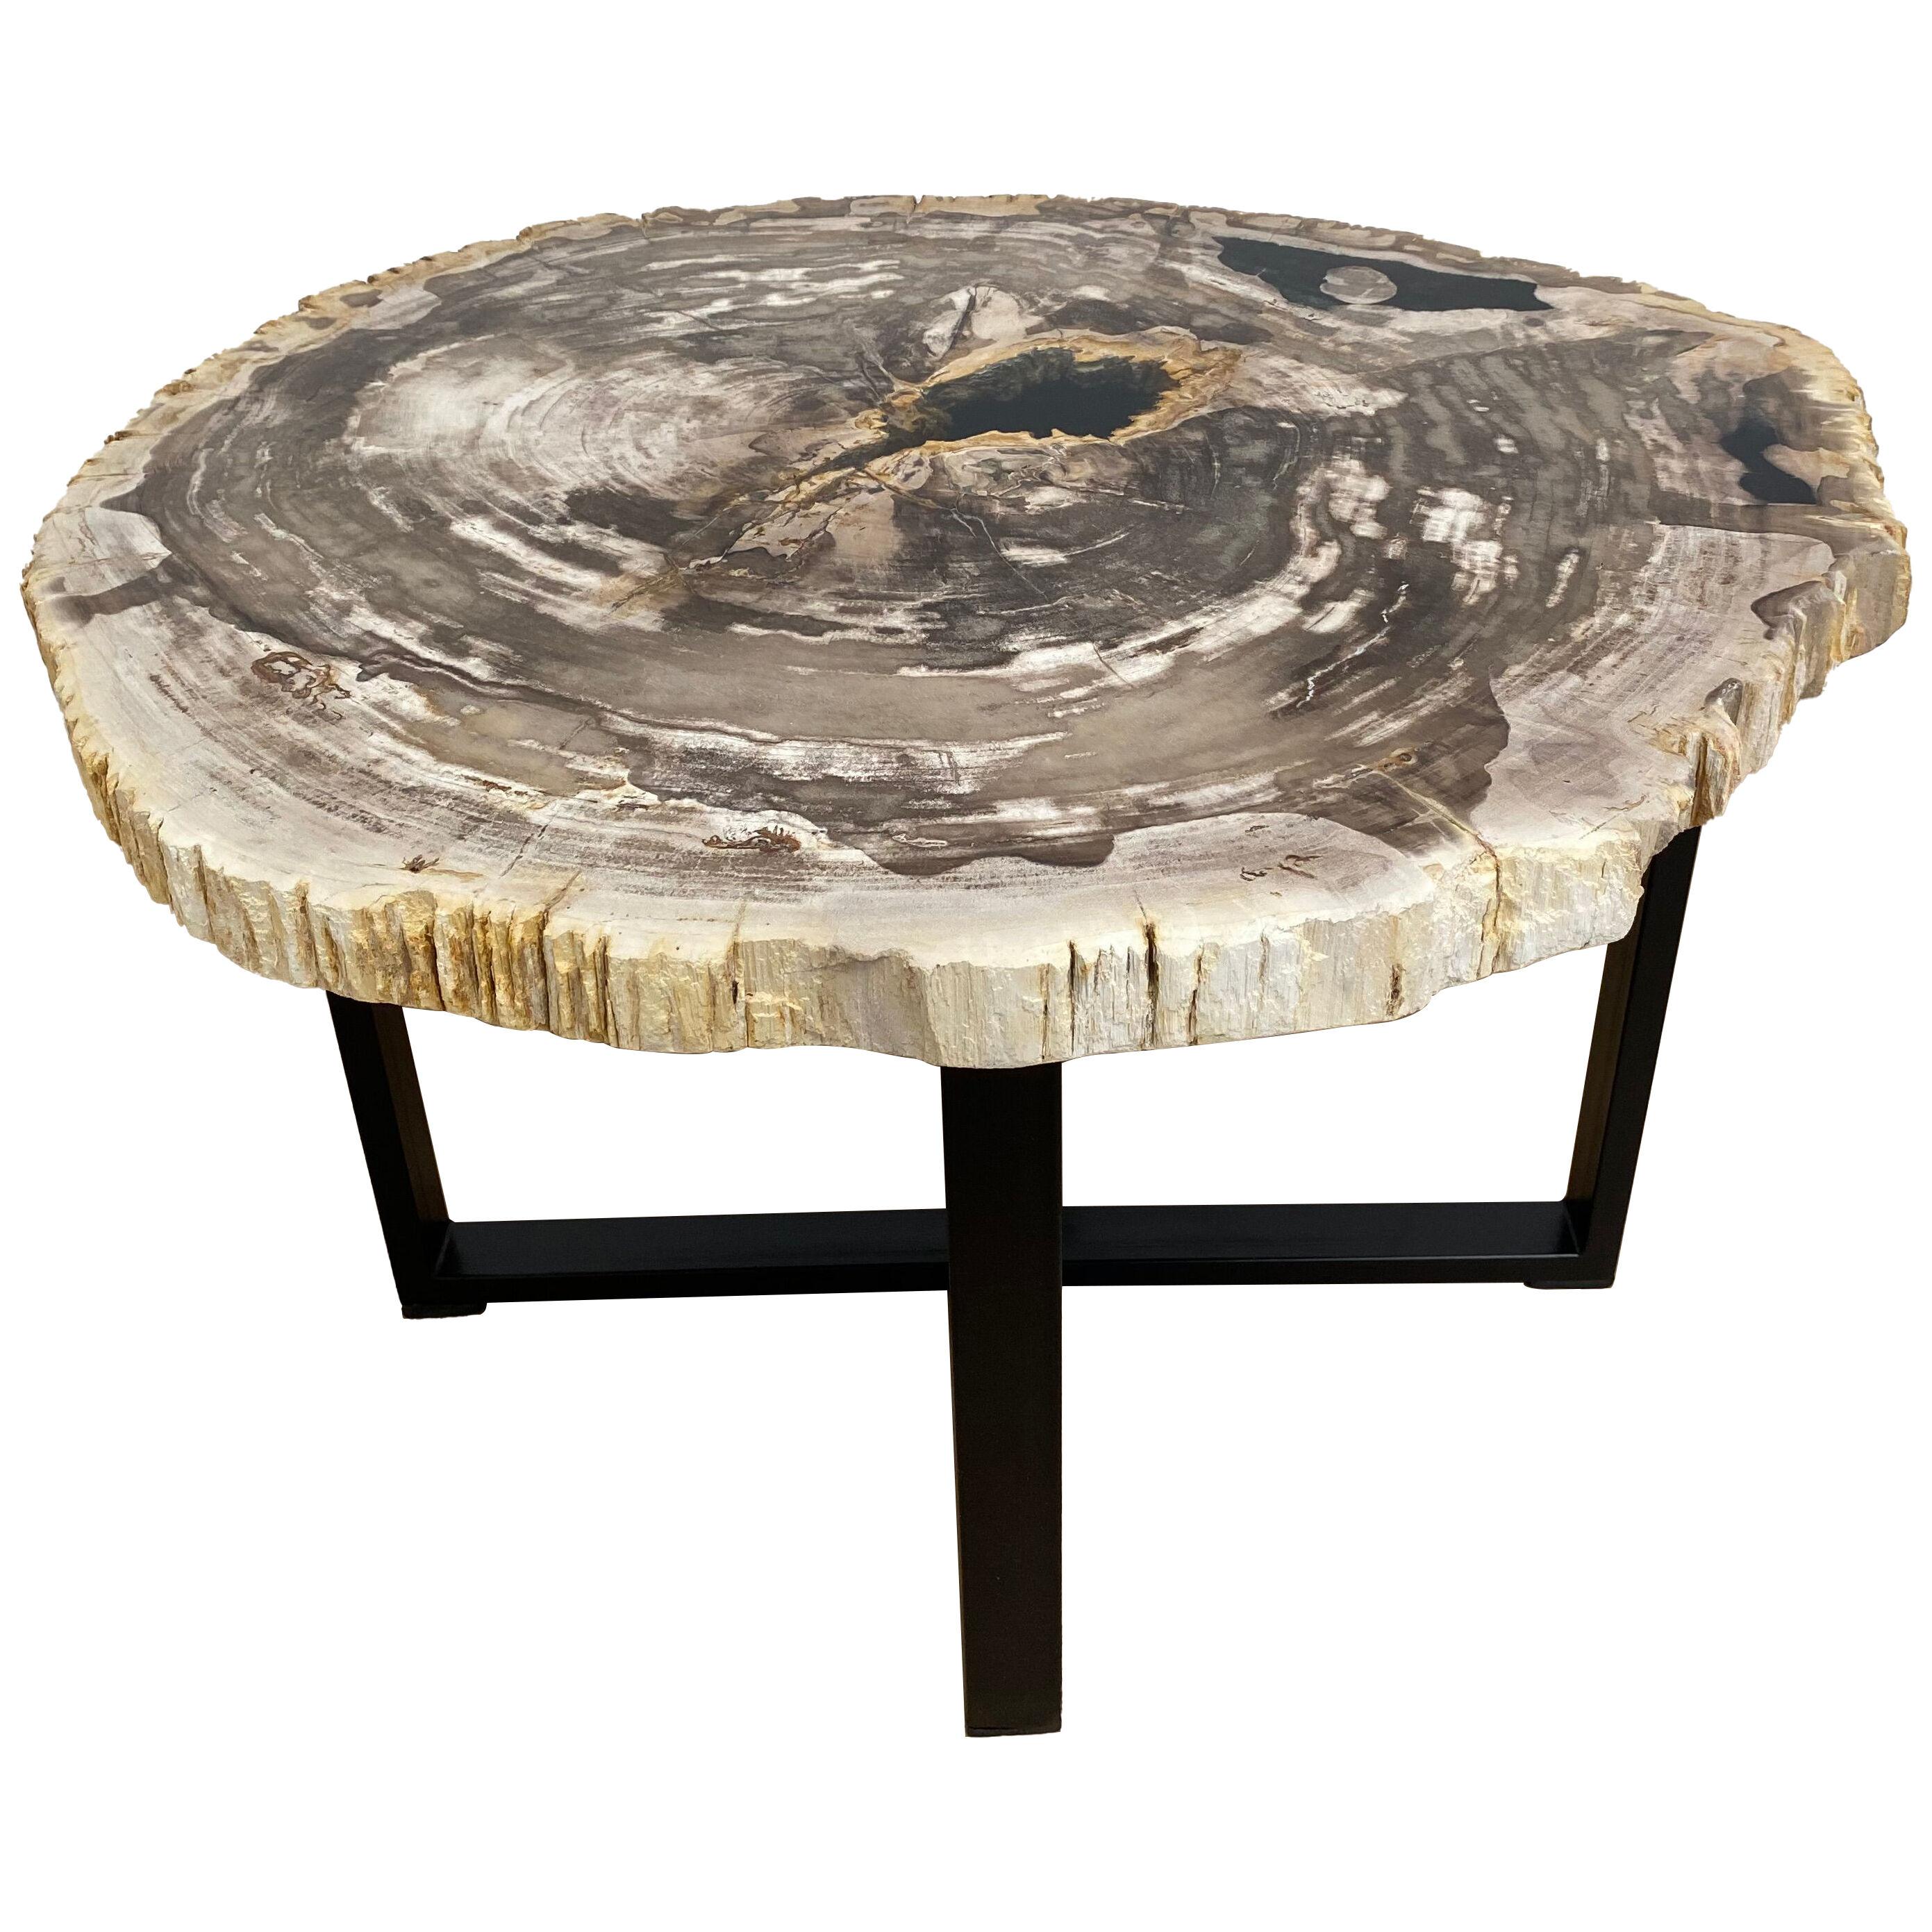 Vintage Wooden Petrified Table